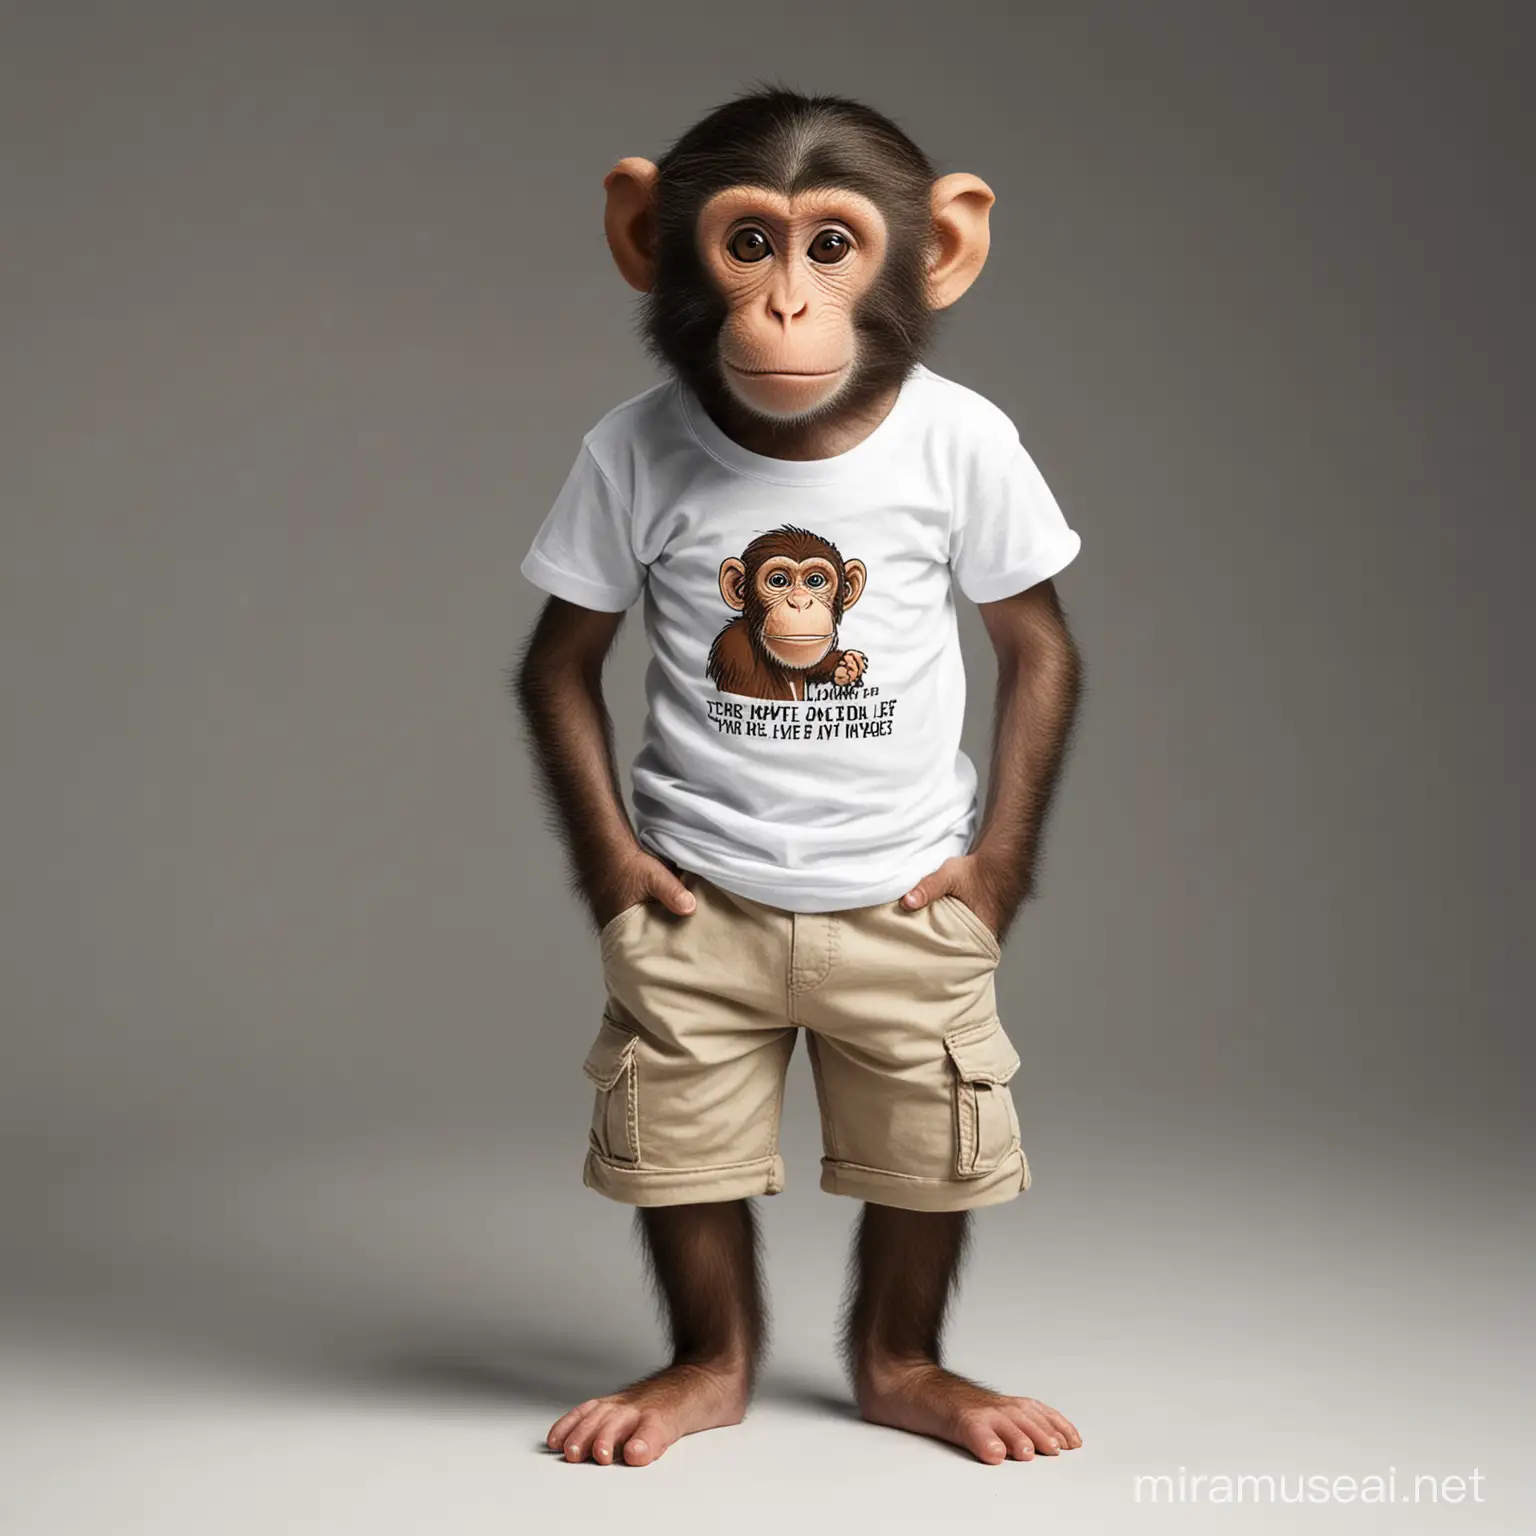 MONKEY WEARING SHORTS AND T SHIRT AND TALKING ABOUT LIFE